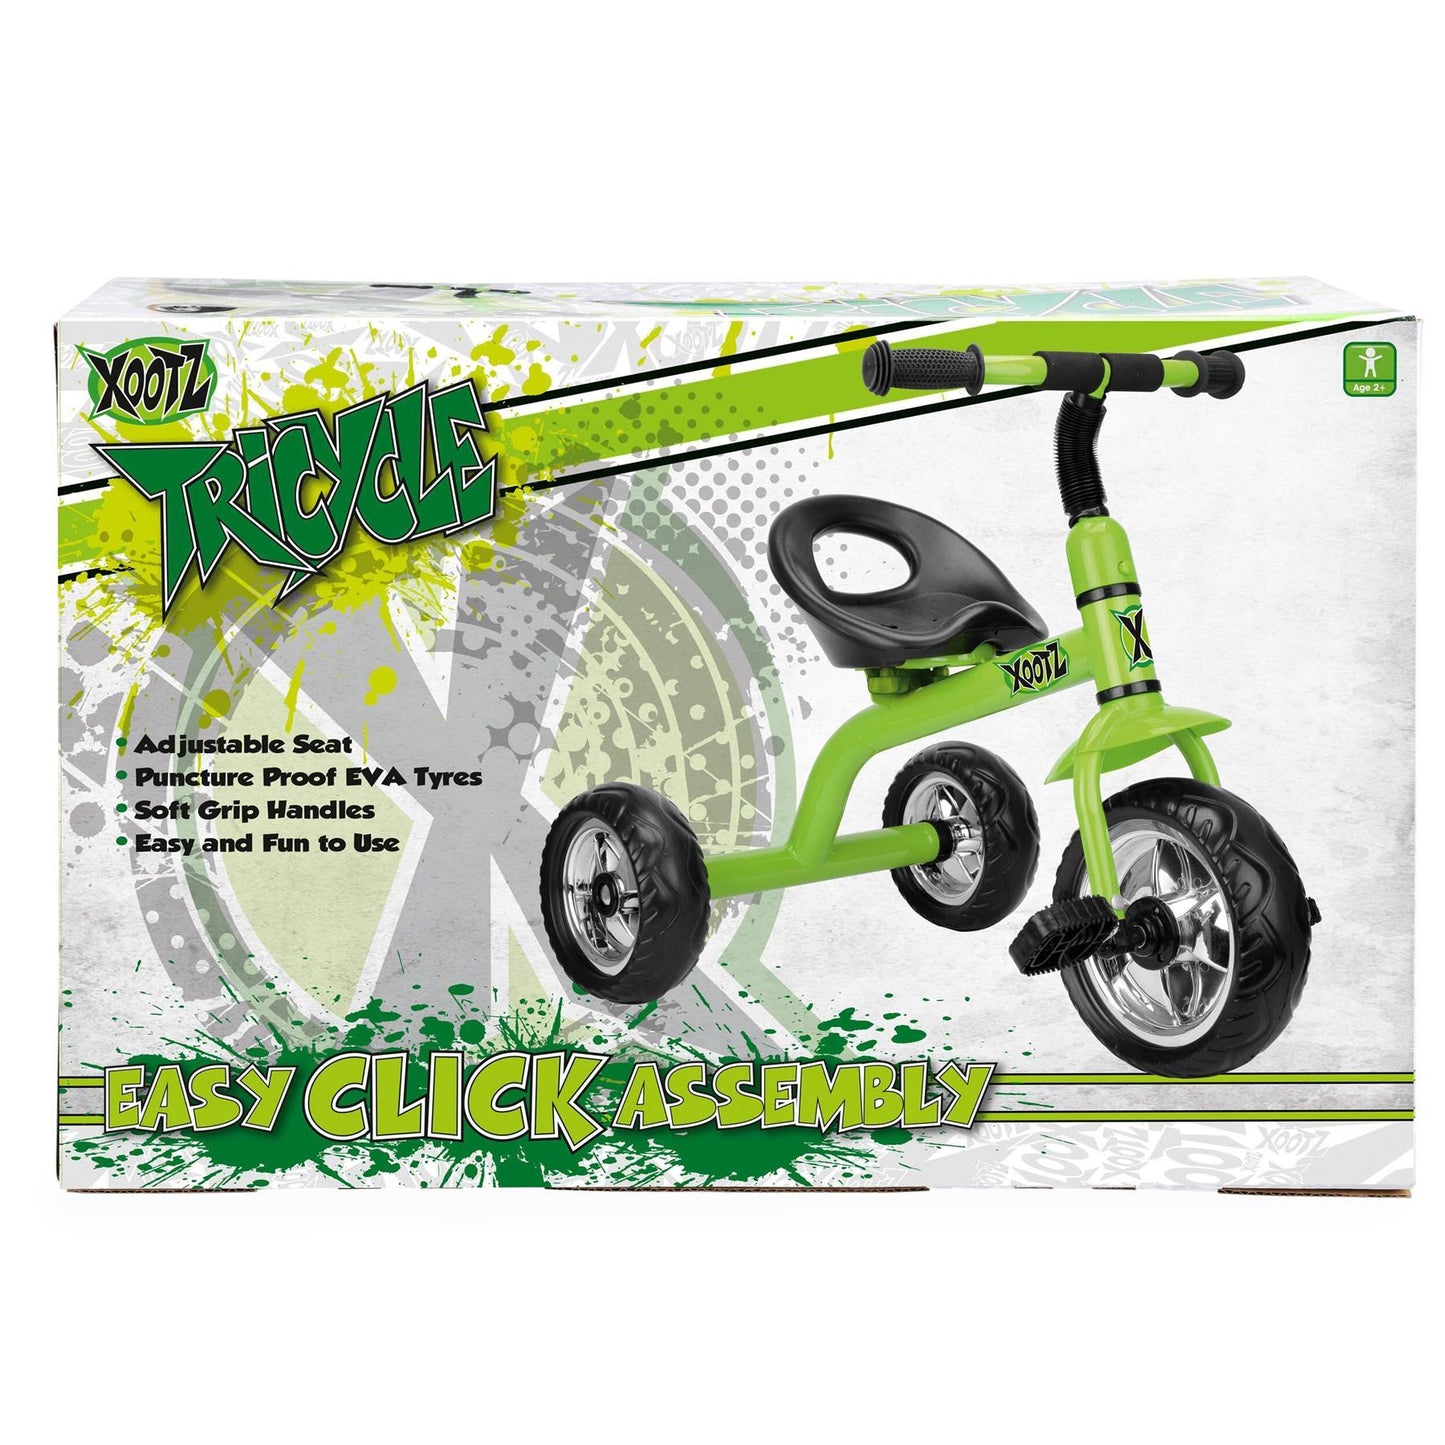 Xootz Tricycle Kids Trike Green Pedal Tricycle TY5900GR